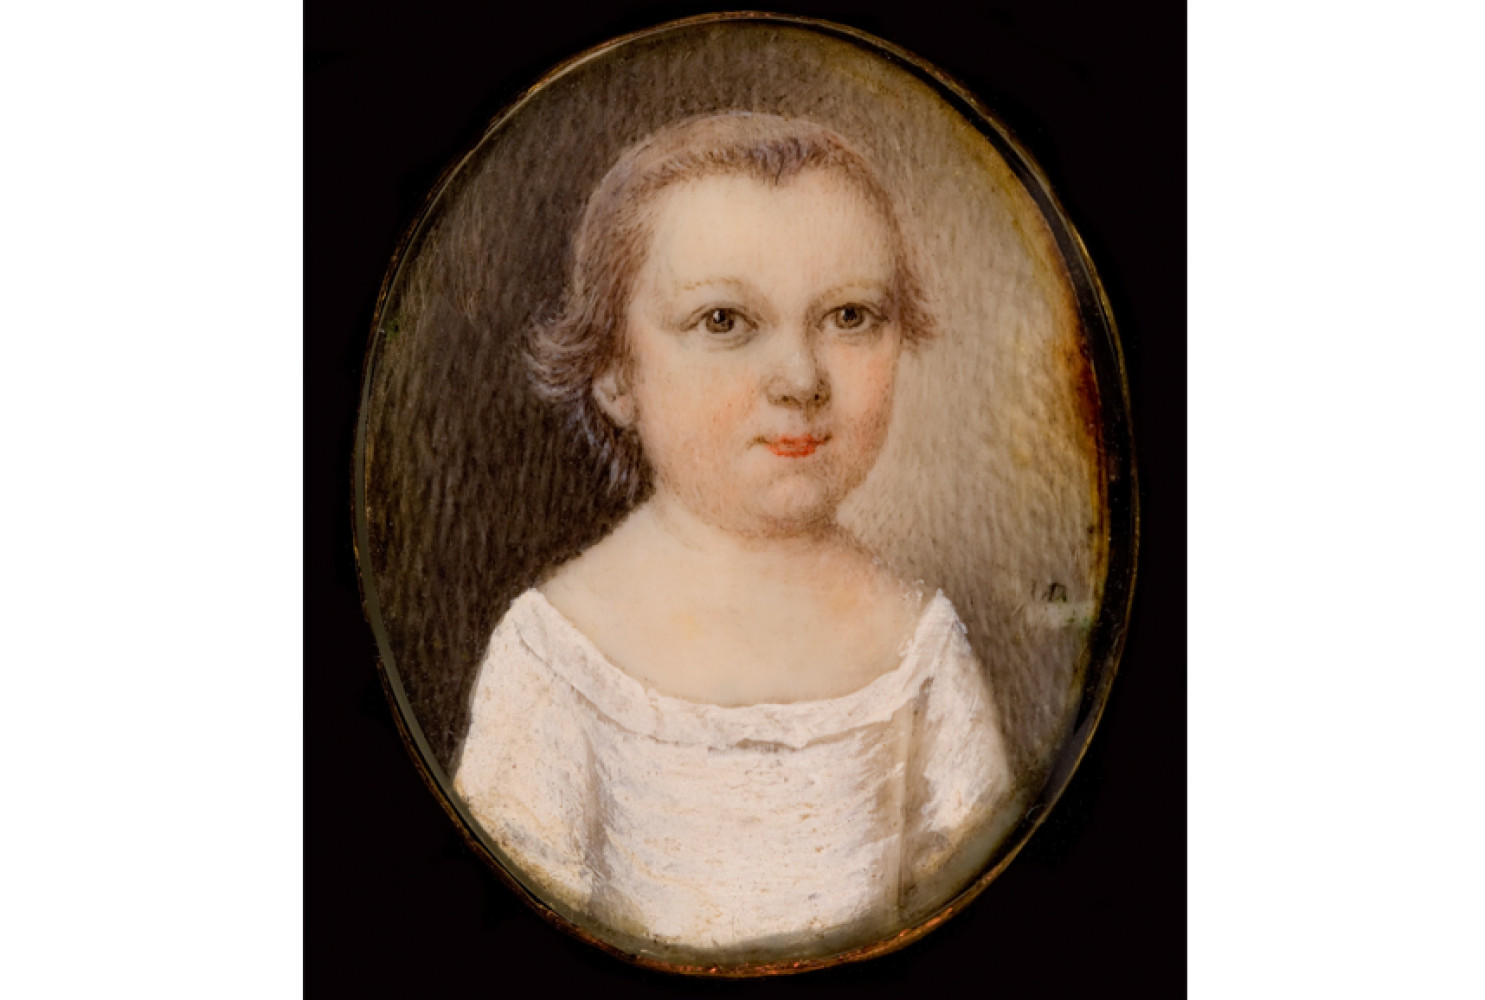 Unidentified sitter, ca. 1745, by Mary Roberts (American, d. 1761); watercolor on ivory; 1 1/8 x 1 inches; Bequest of Mrs. Amelia Josephine Emanuel; 1939.009.0001